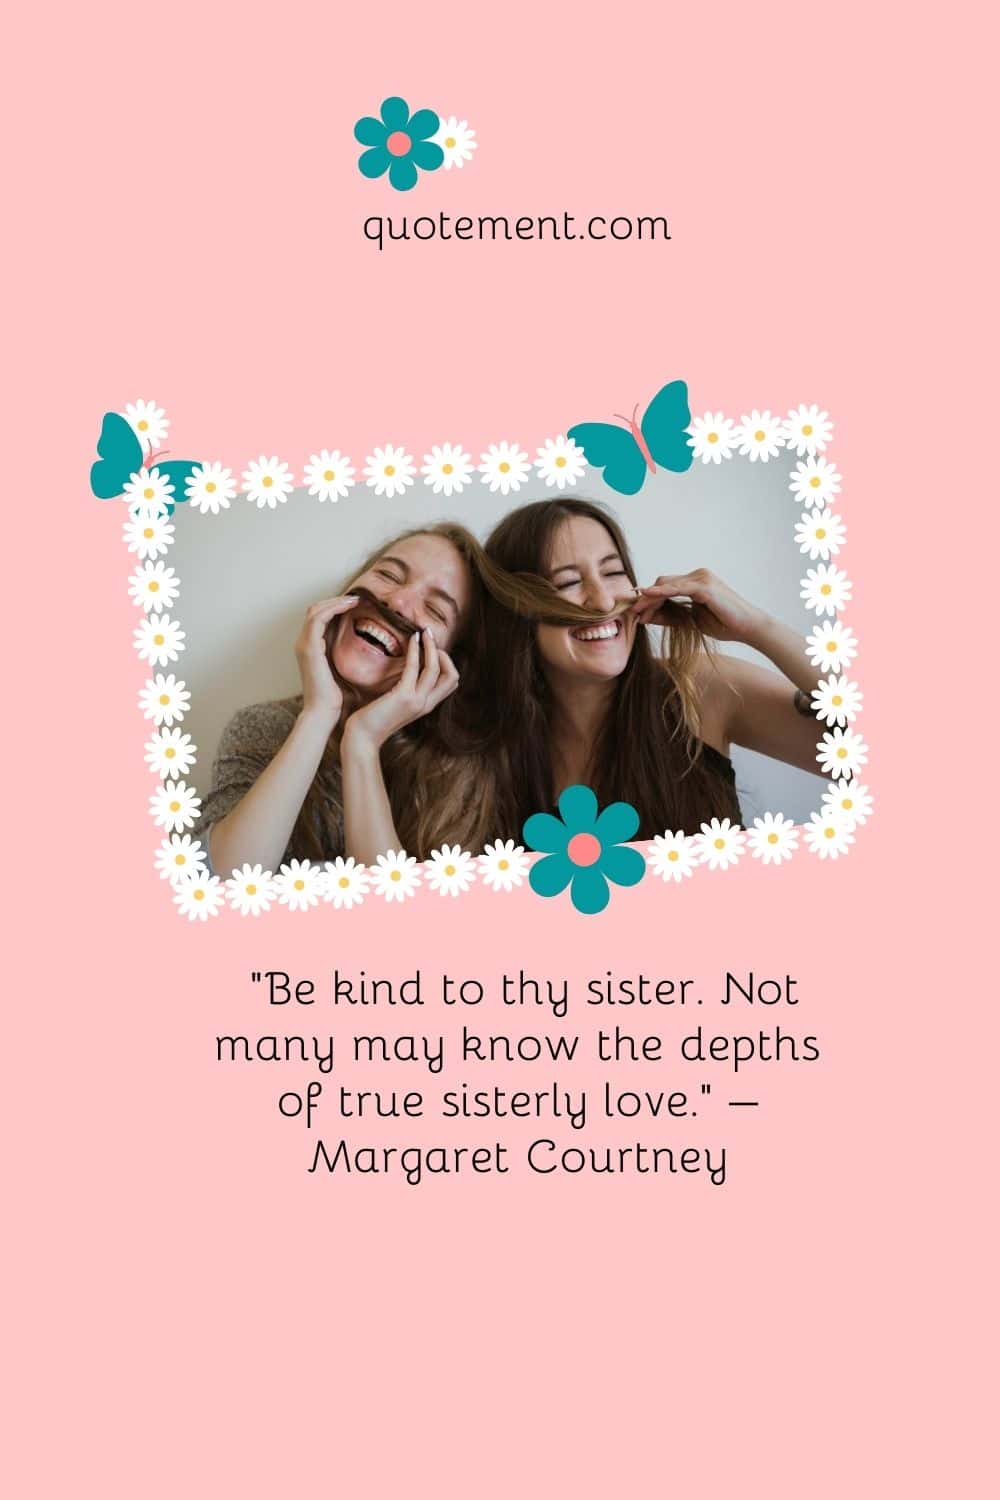 “Be kind to thy sister. Not many may know the depths of true sisterly love.” – Margaret Courtney